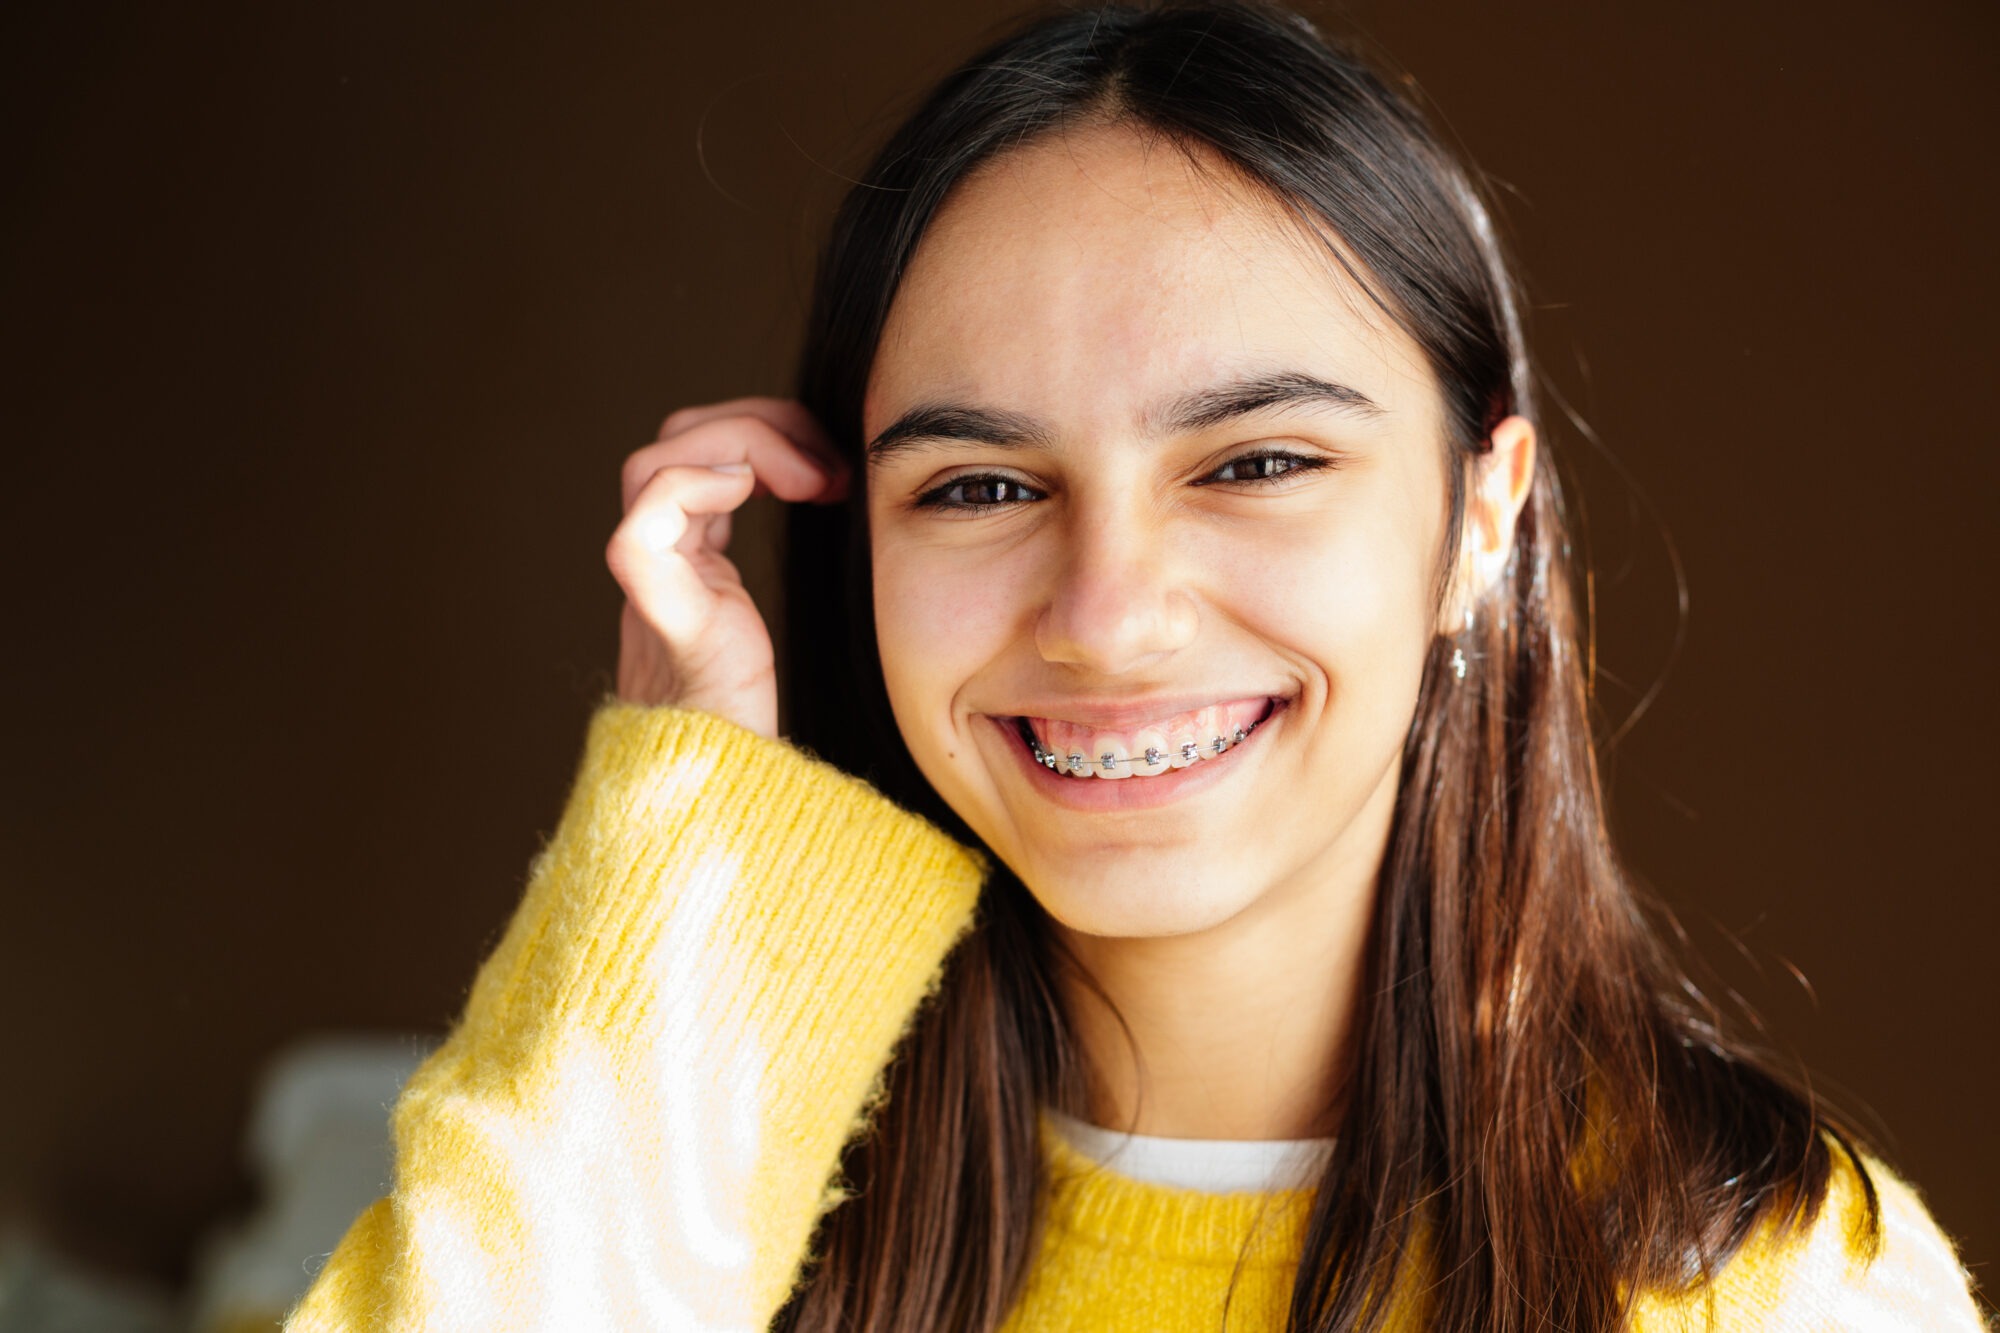 We love sharing how orthodontics can help change people’s lives so today we're sharing our top 5 benefits of straight teeth!